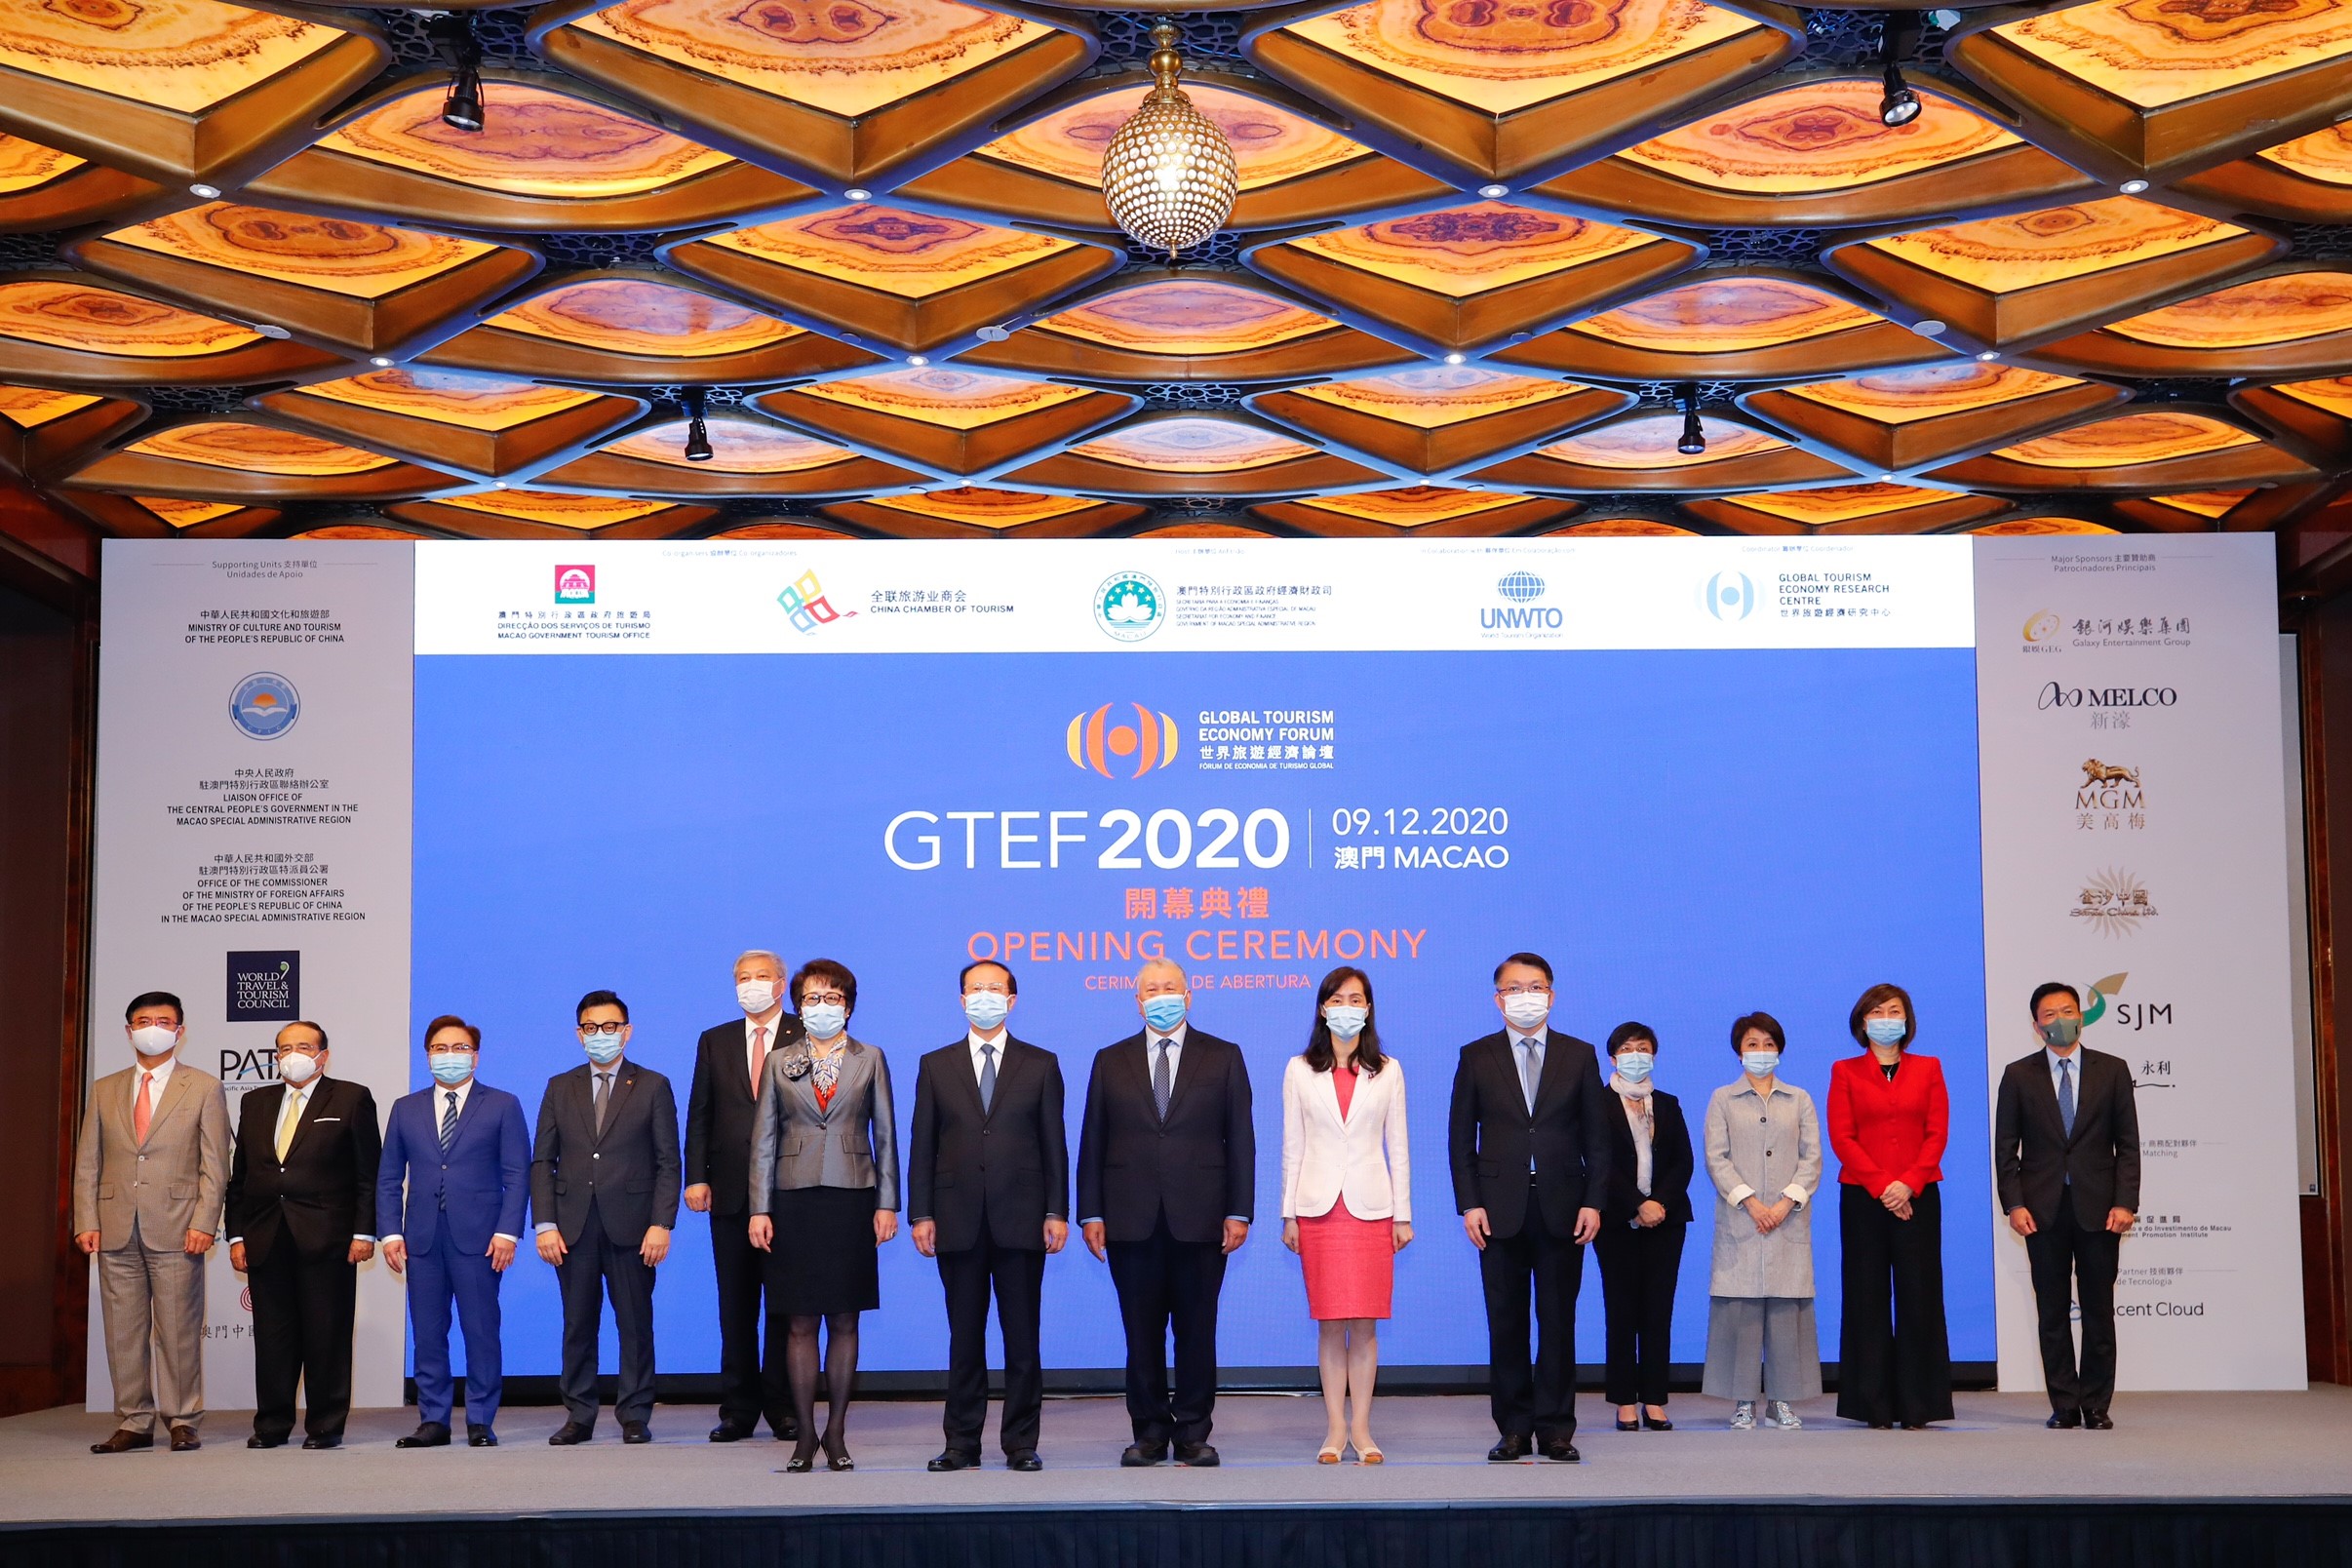 2_GTEF2020 Opening_group photo